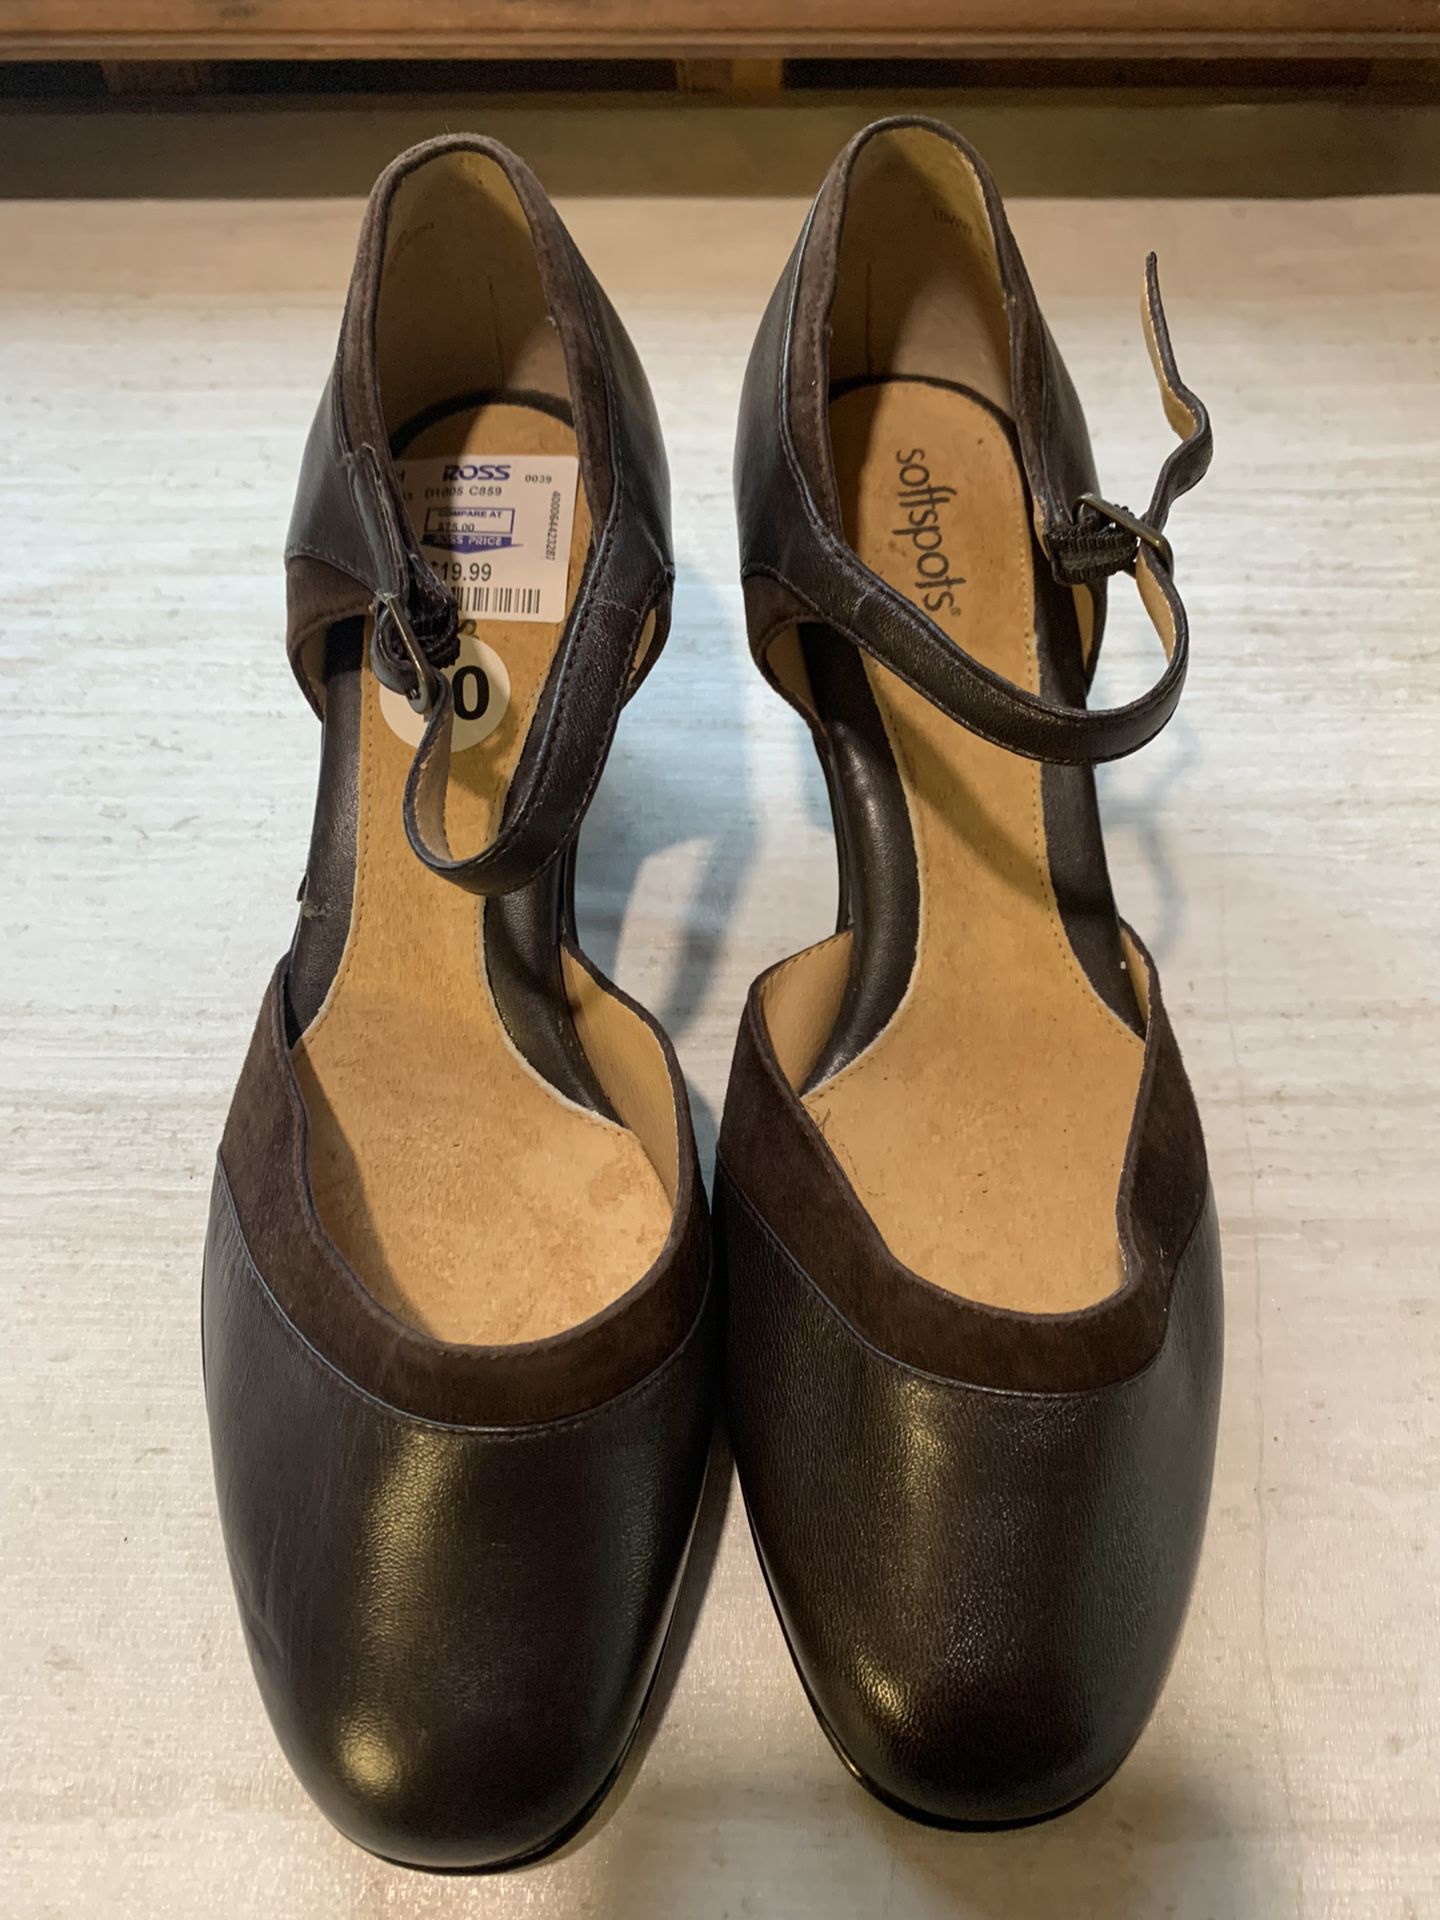 New SoftSpot Brown Leather Mary Jane’s Size 10